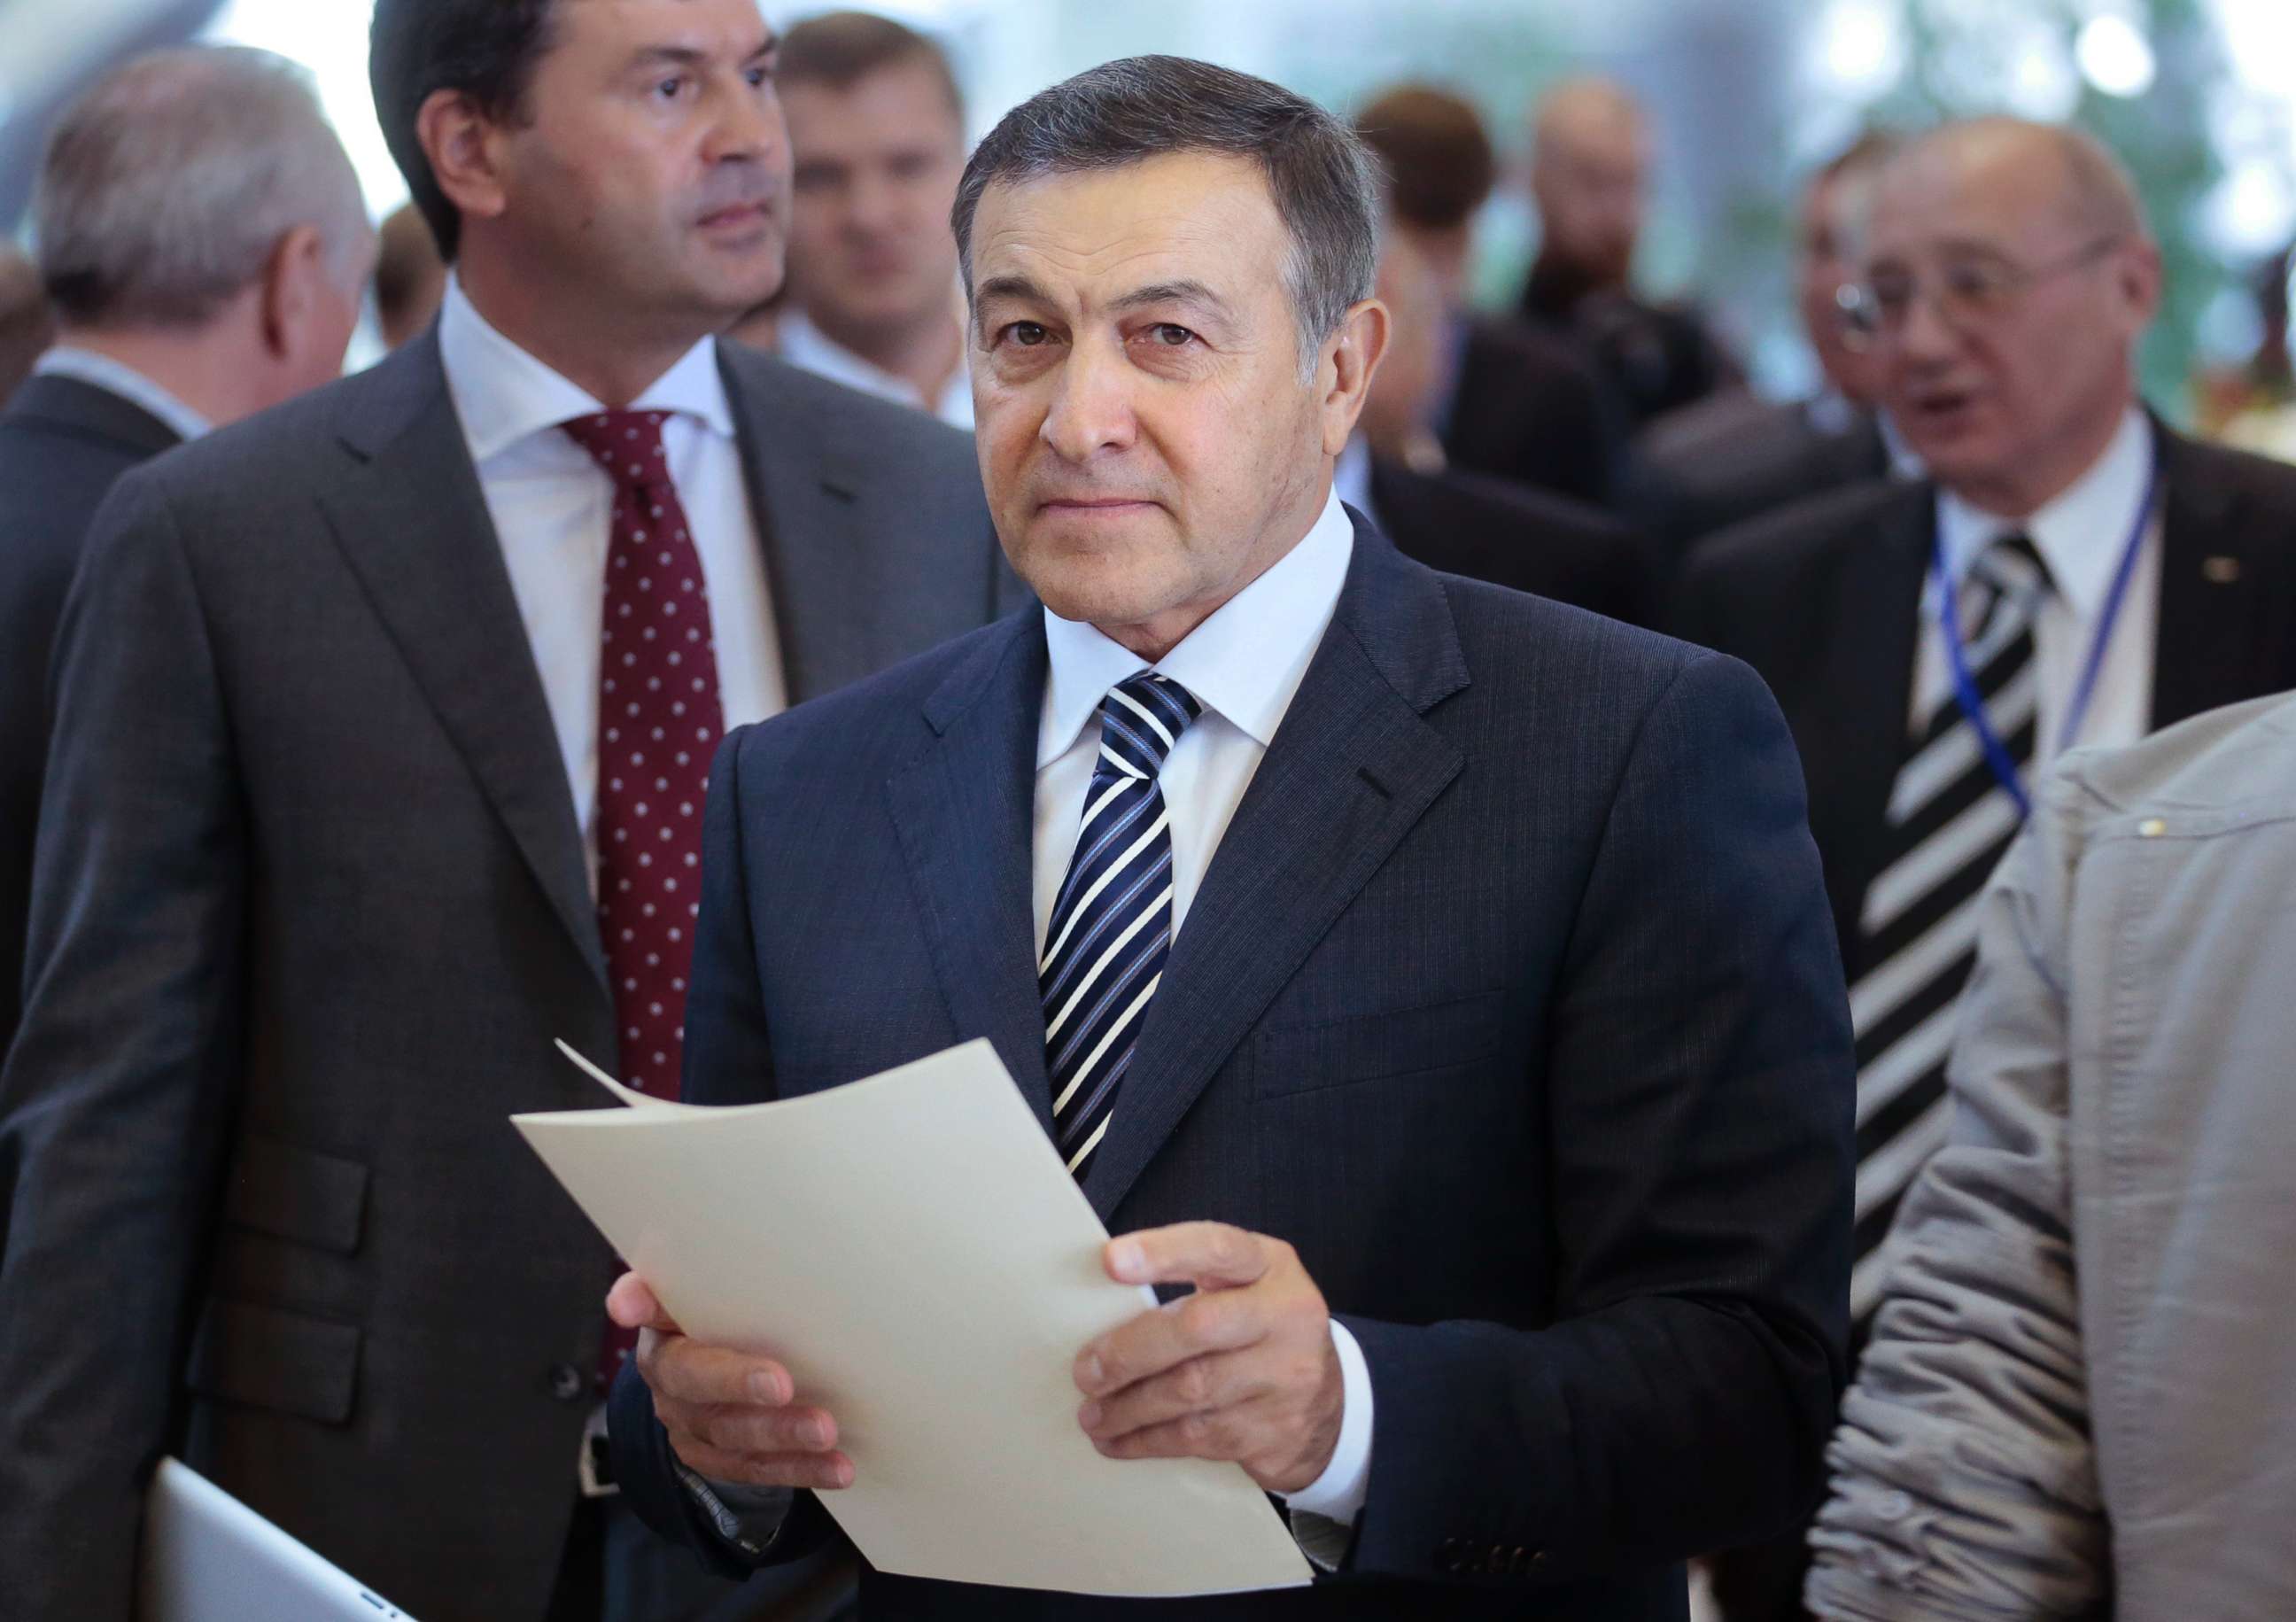 PHOTO: Russian businessman Aras Agalarov during an event in Moscow, Aug. 30, 2012. 